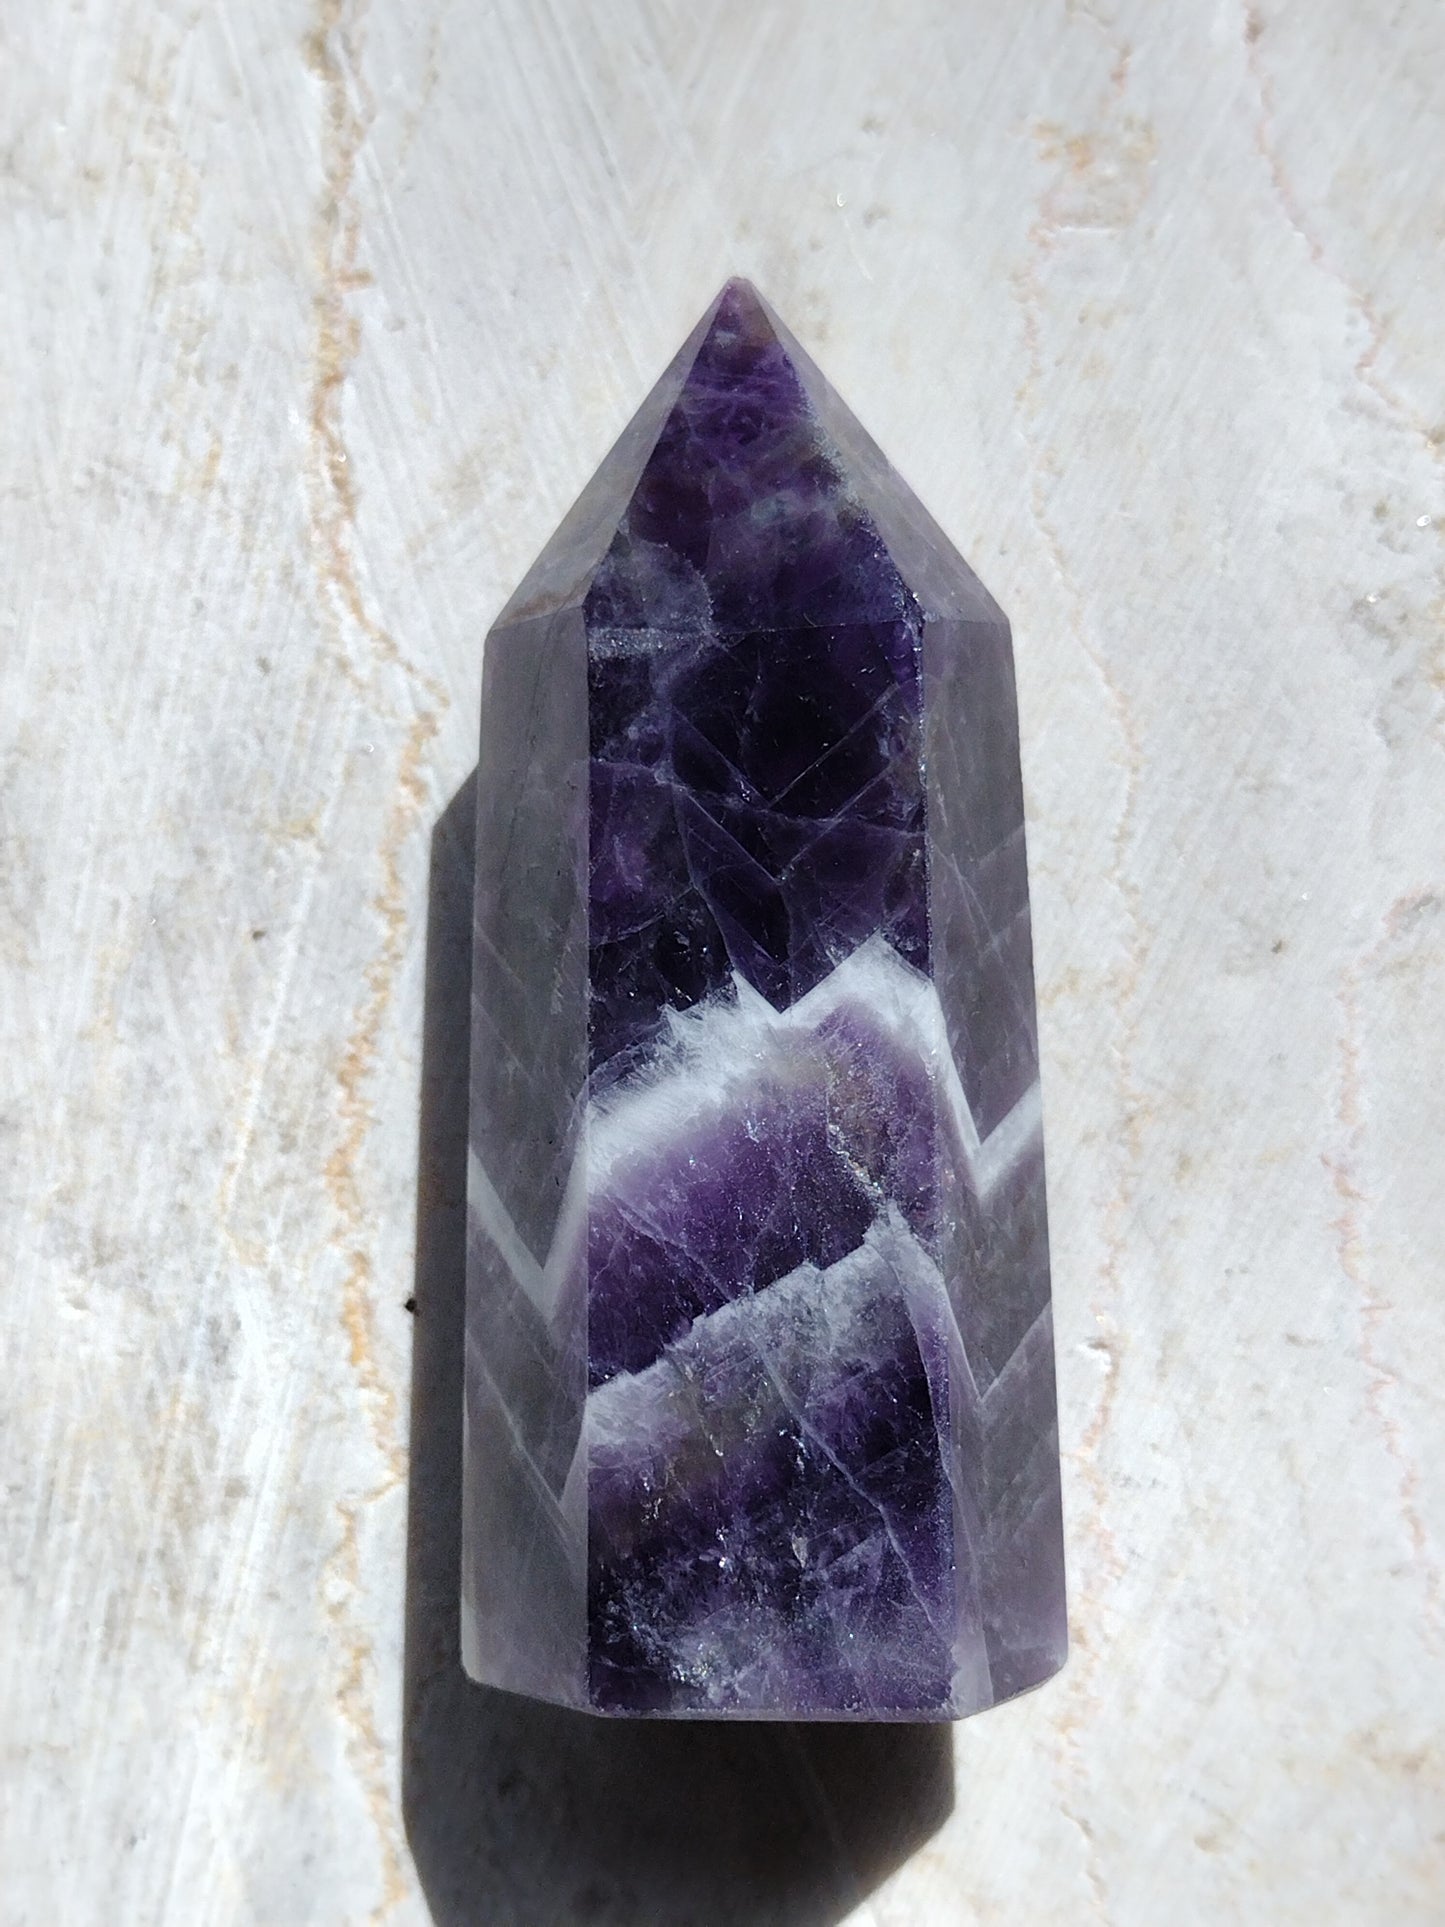 Chevron amethyst or Dream amethyst opens the crown chakra and eases feelings of anxiety. Shop our San Diego crystal shop for amethyst stones, amethyst carvings, amethyst jewelry and more!